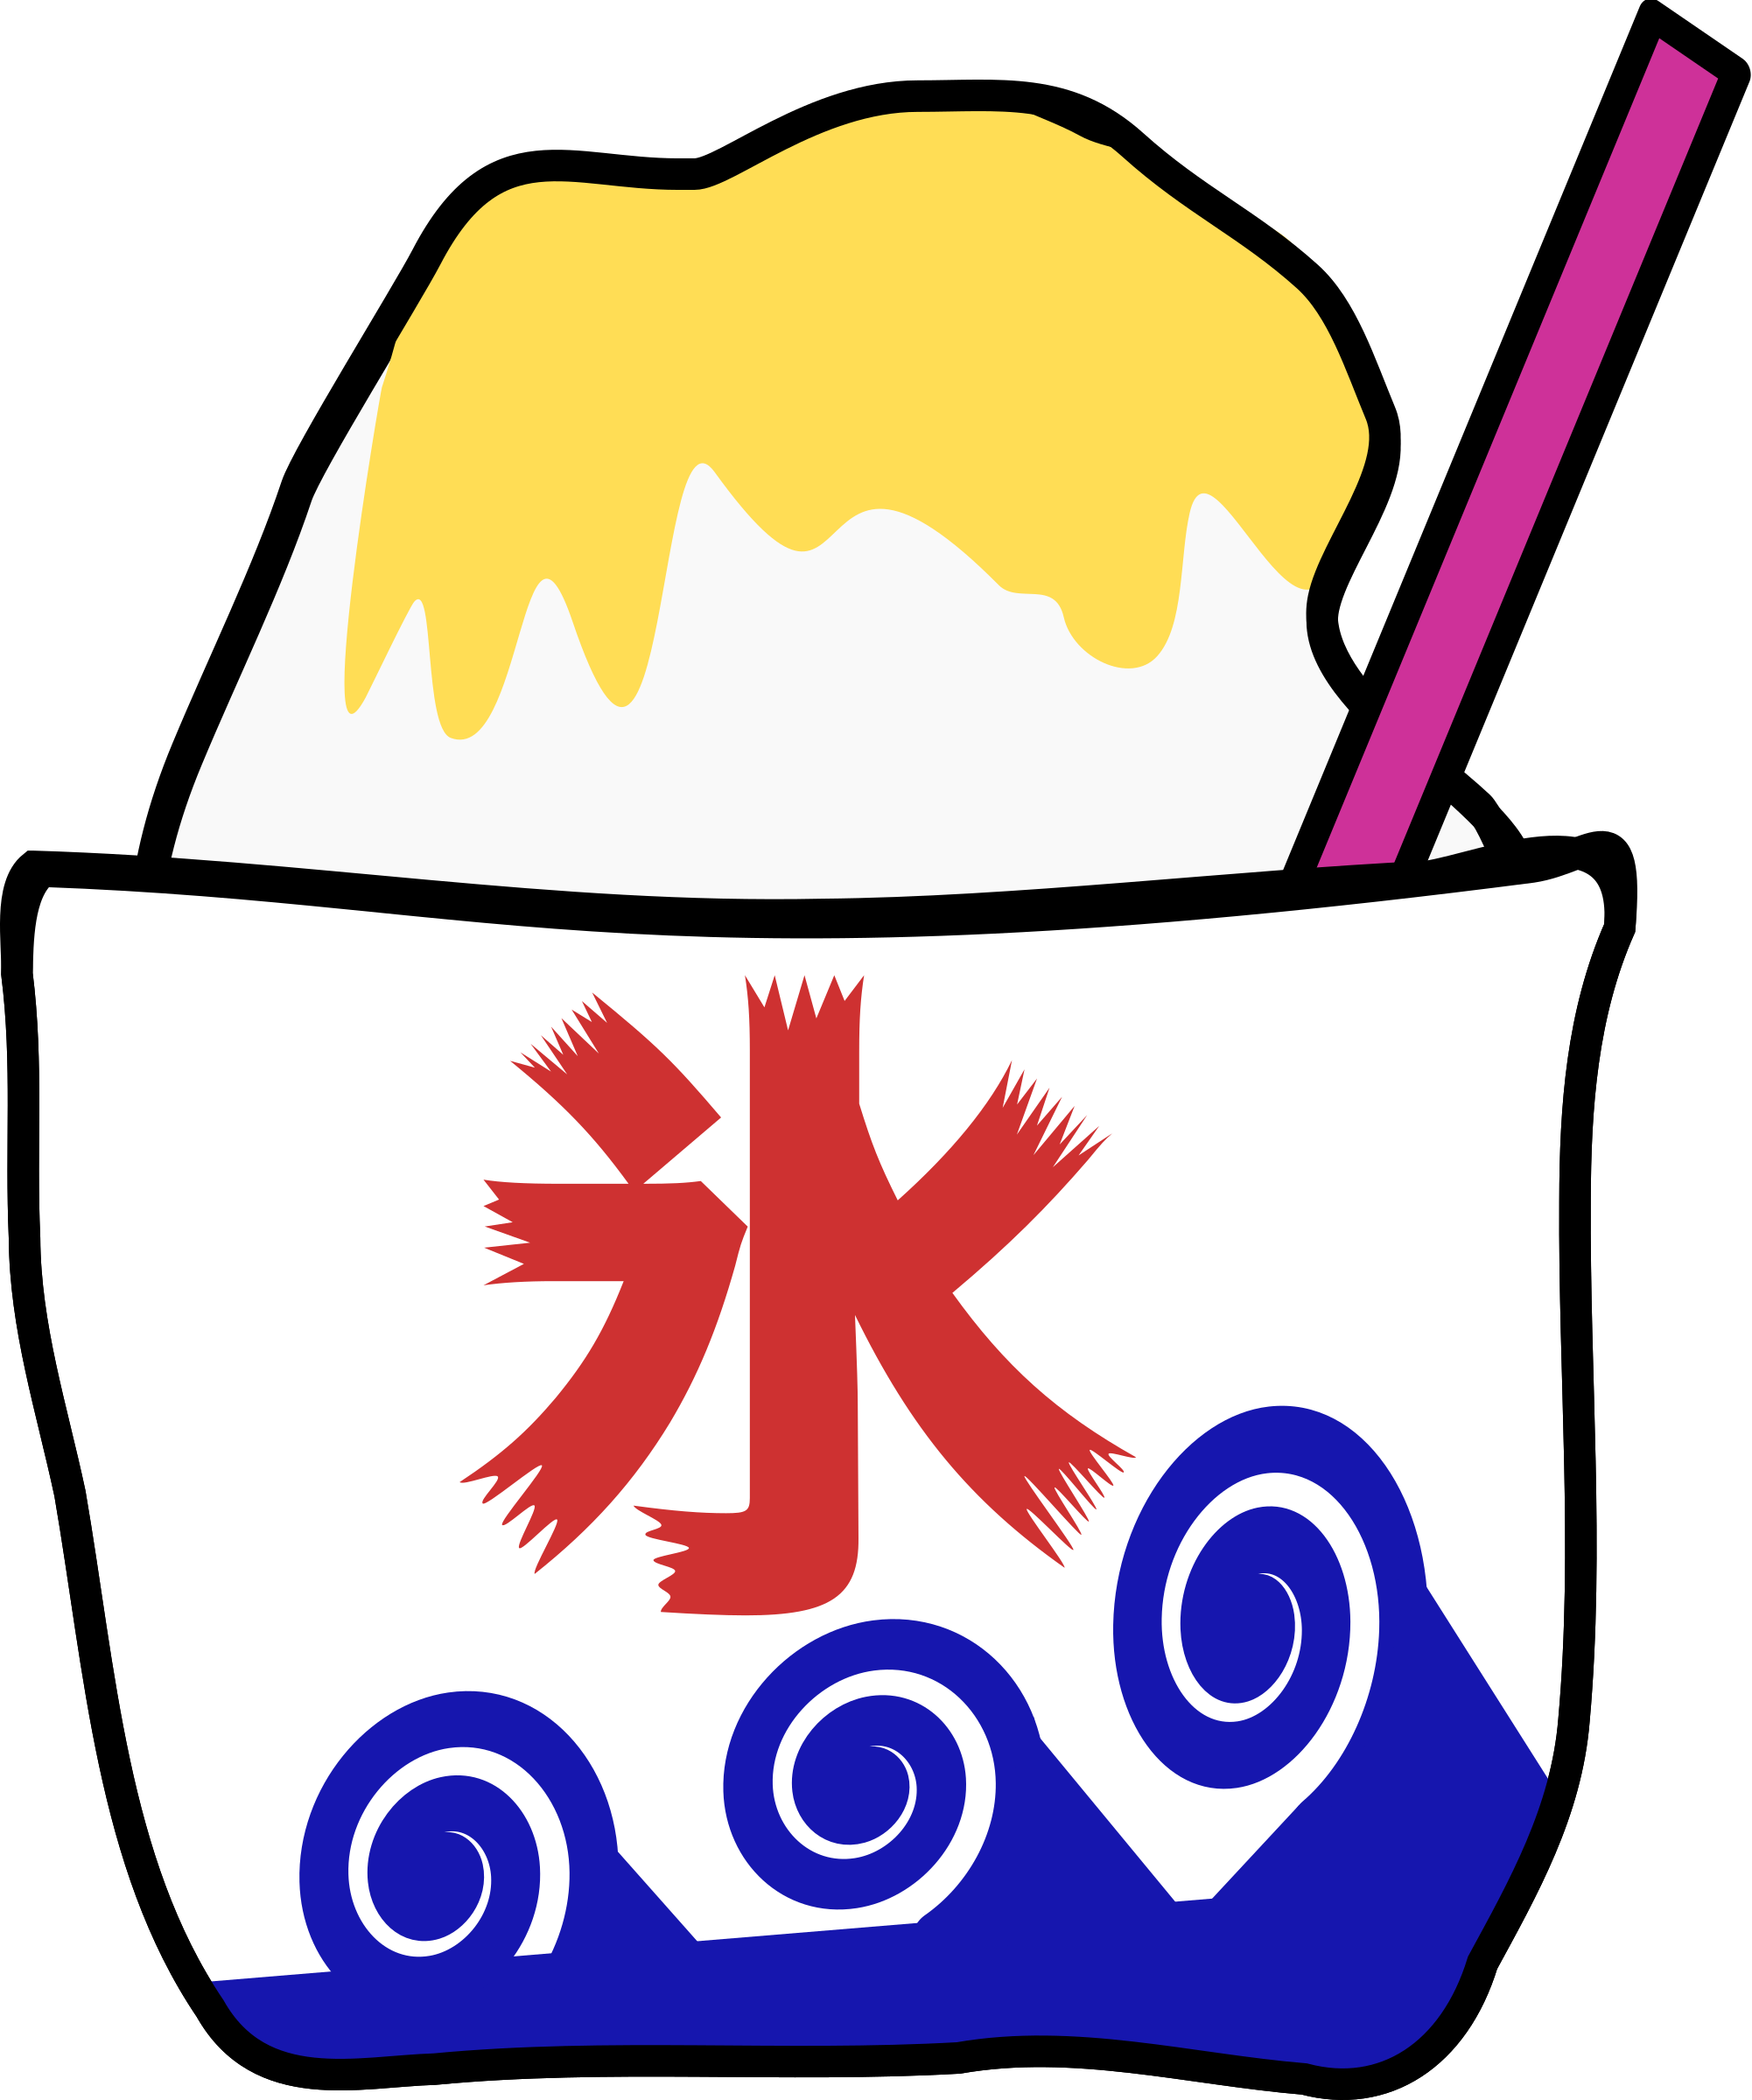 Related Shaved Ice Clipart - Shaved Ice Clip Art (2002x2400)